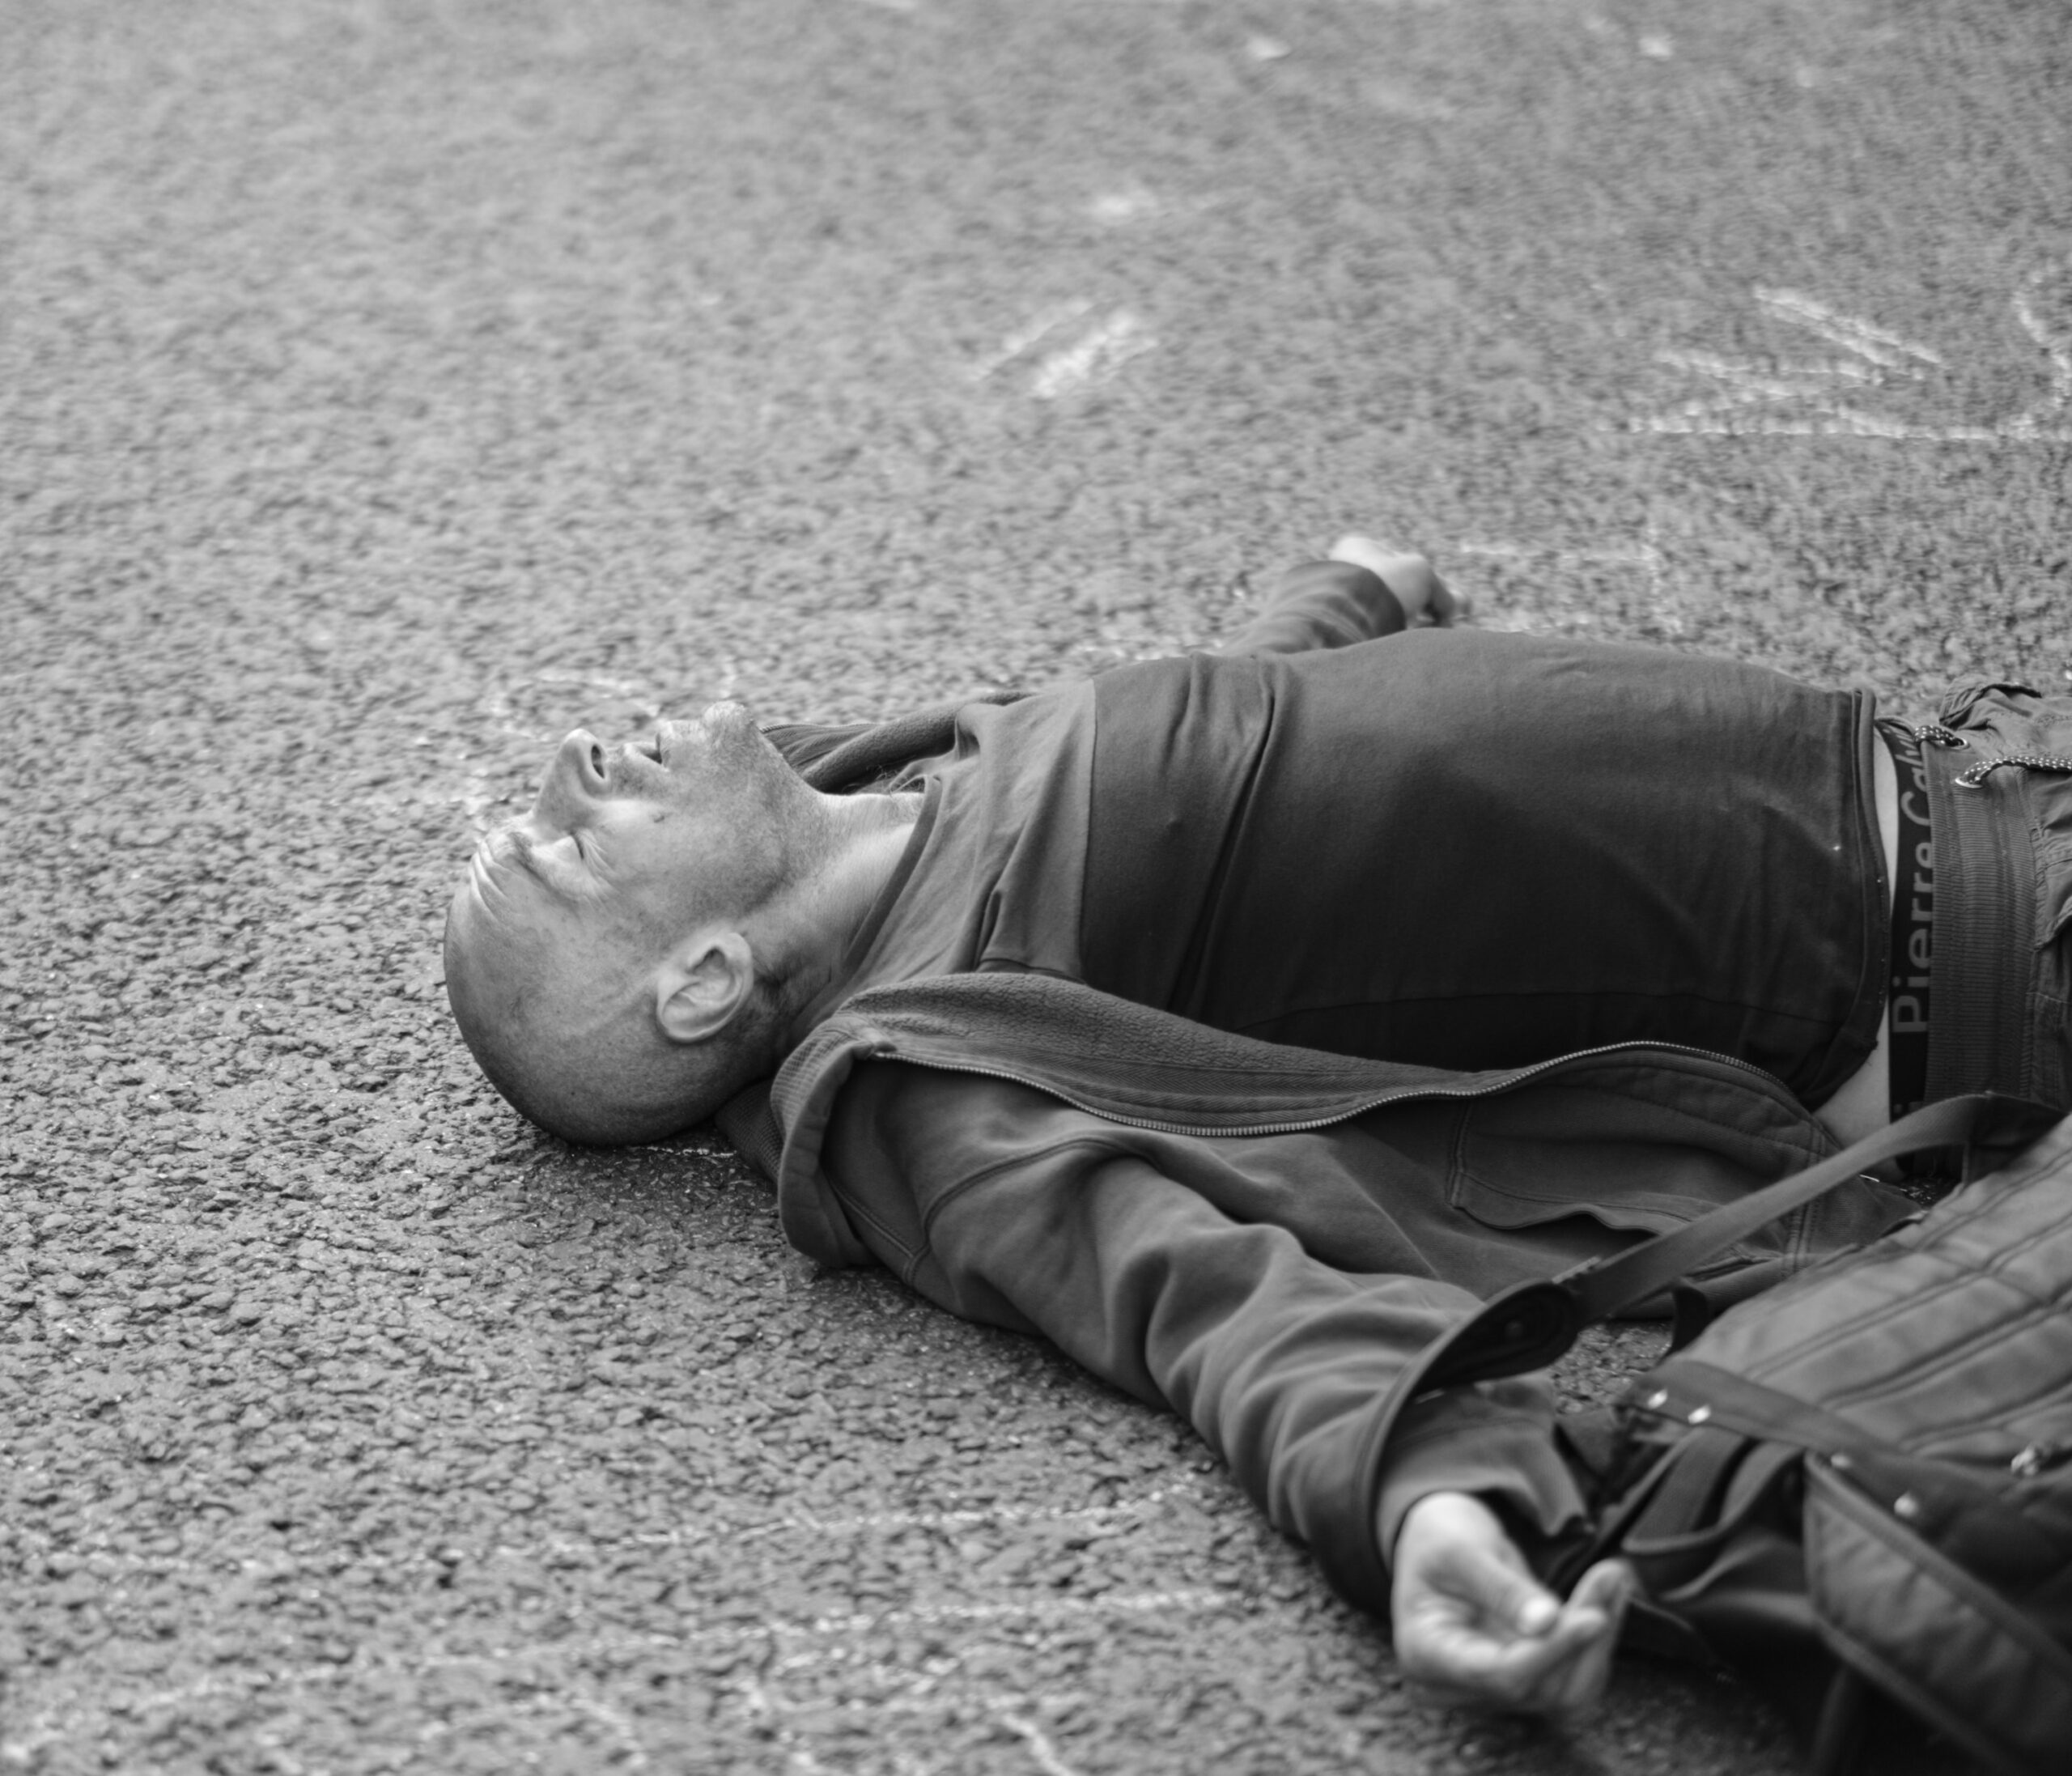 man lying exhausted on pavement Quit parenting strategically